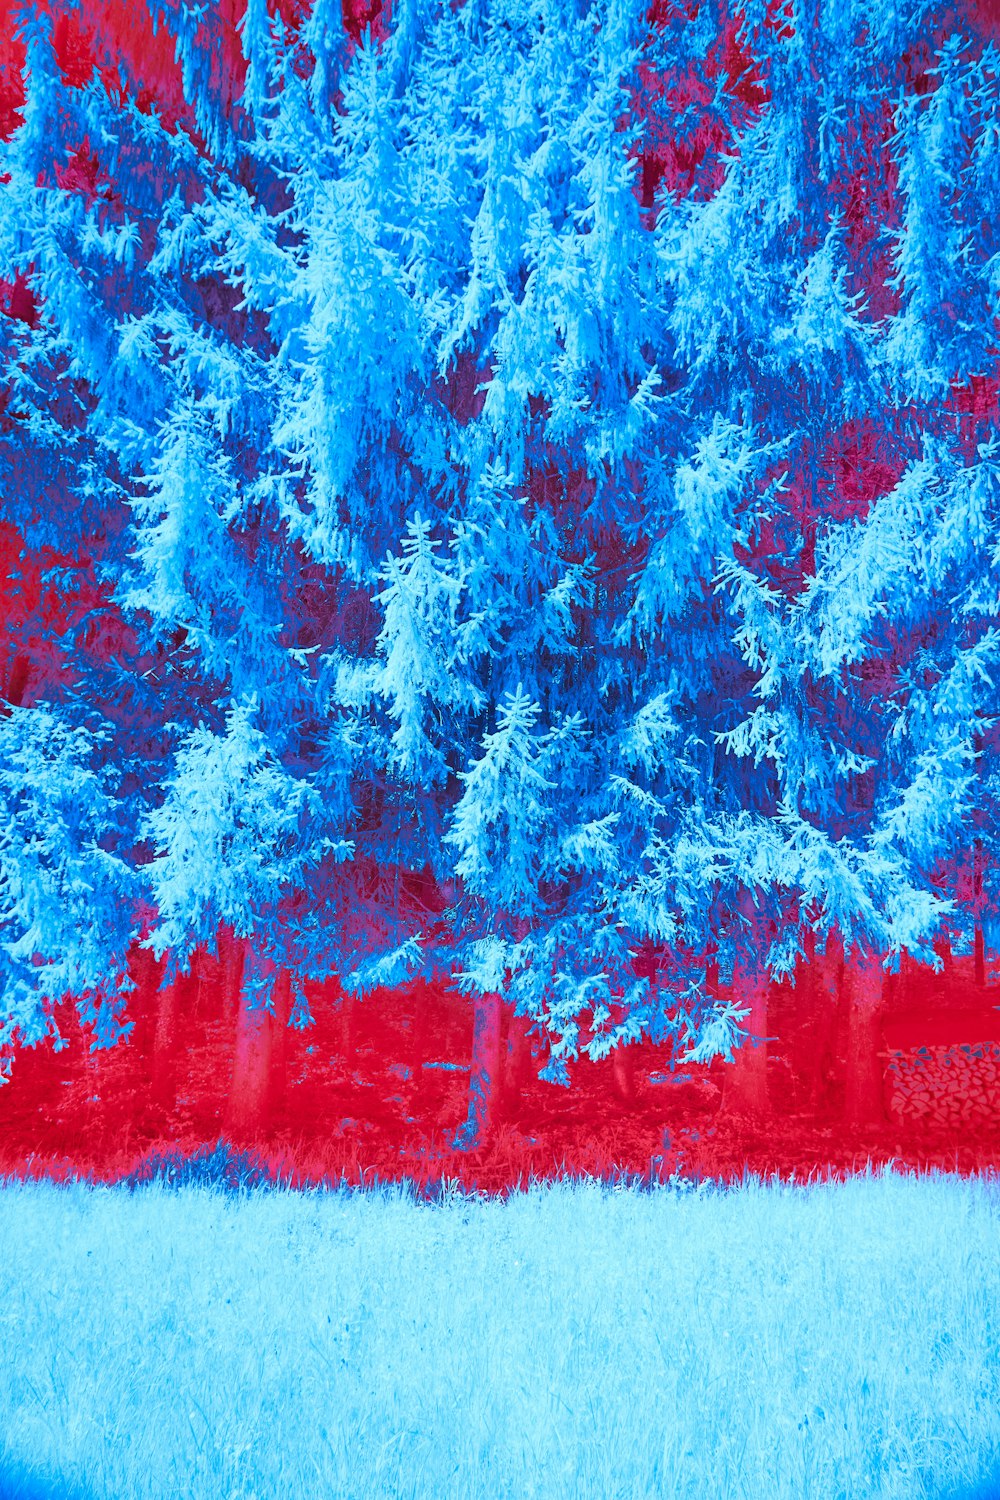 a painting of blue trees against a red background